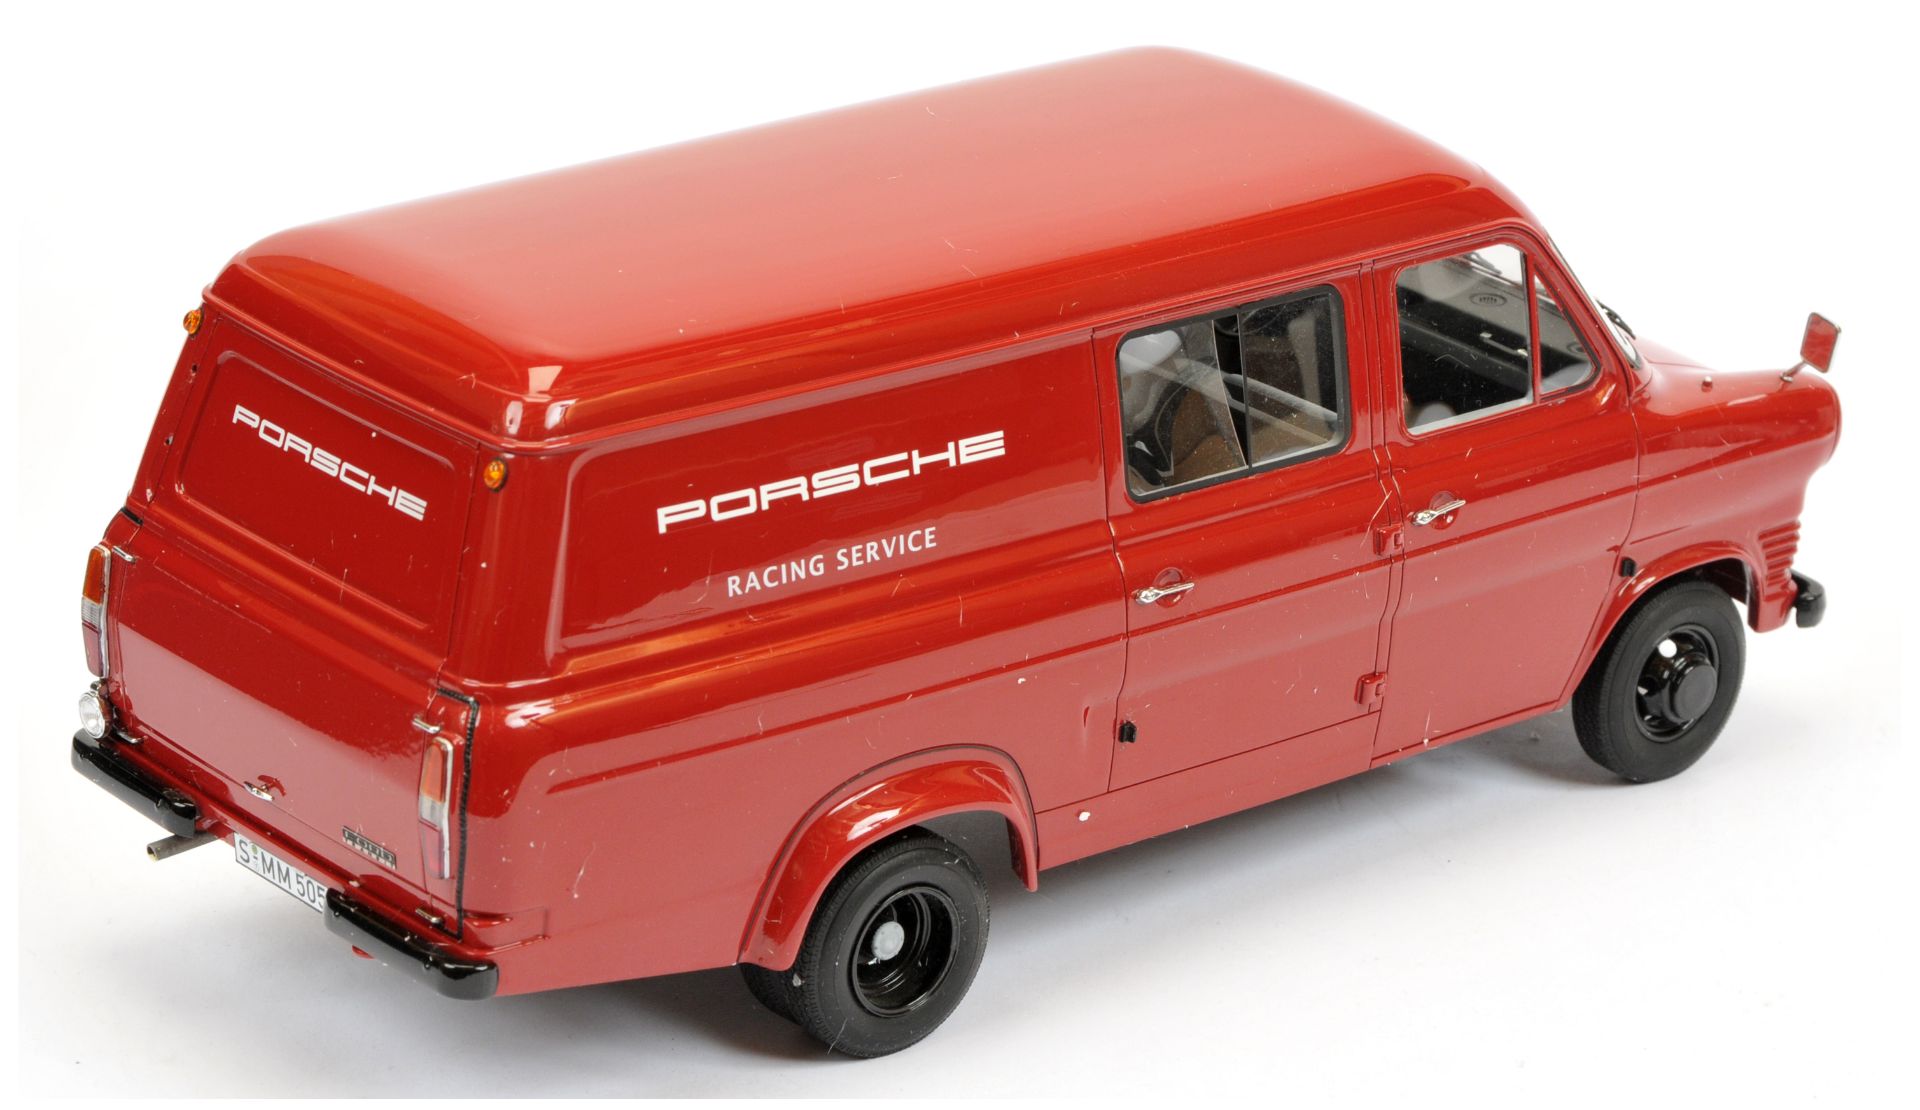 Premium Classixxs 30060 1/18th scale Ford Transit MKI "Porsche Racing Service" - red, limited to ... - Image 2 of 2